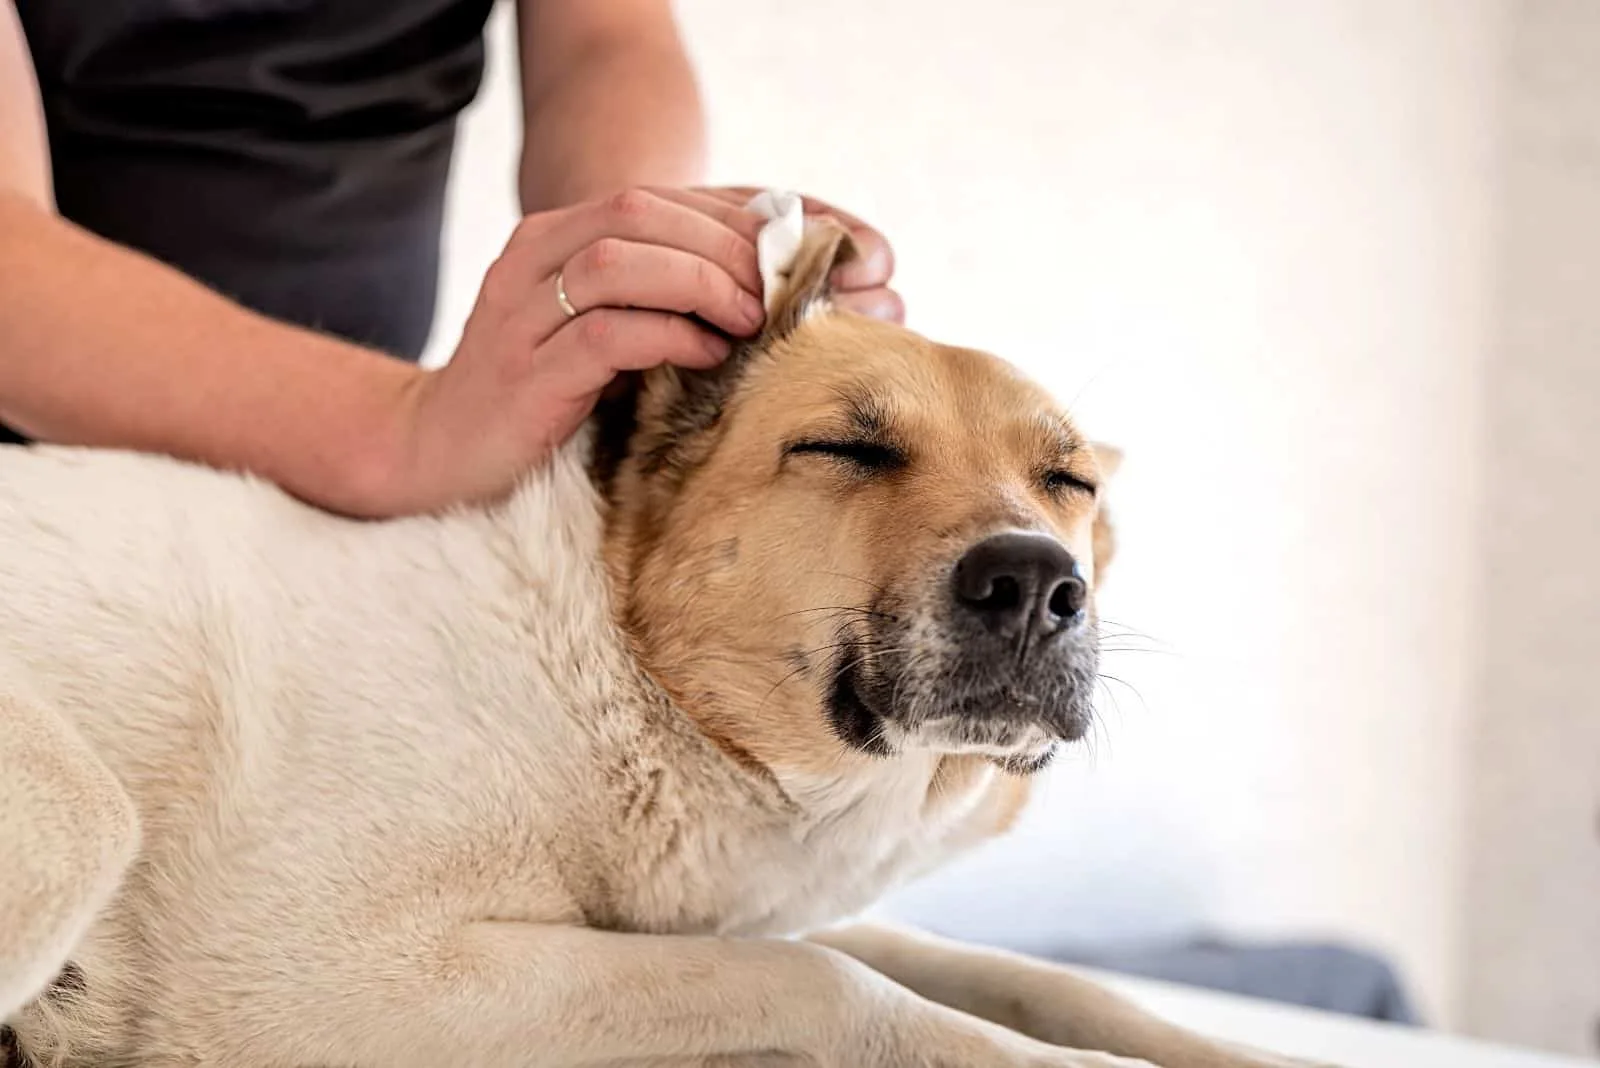 the woman cleans the dog's ears